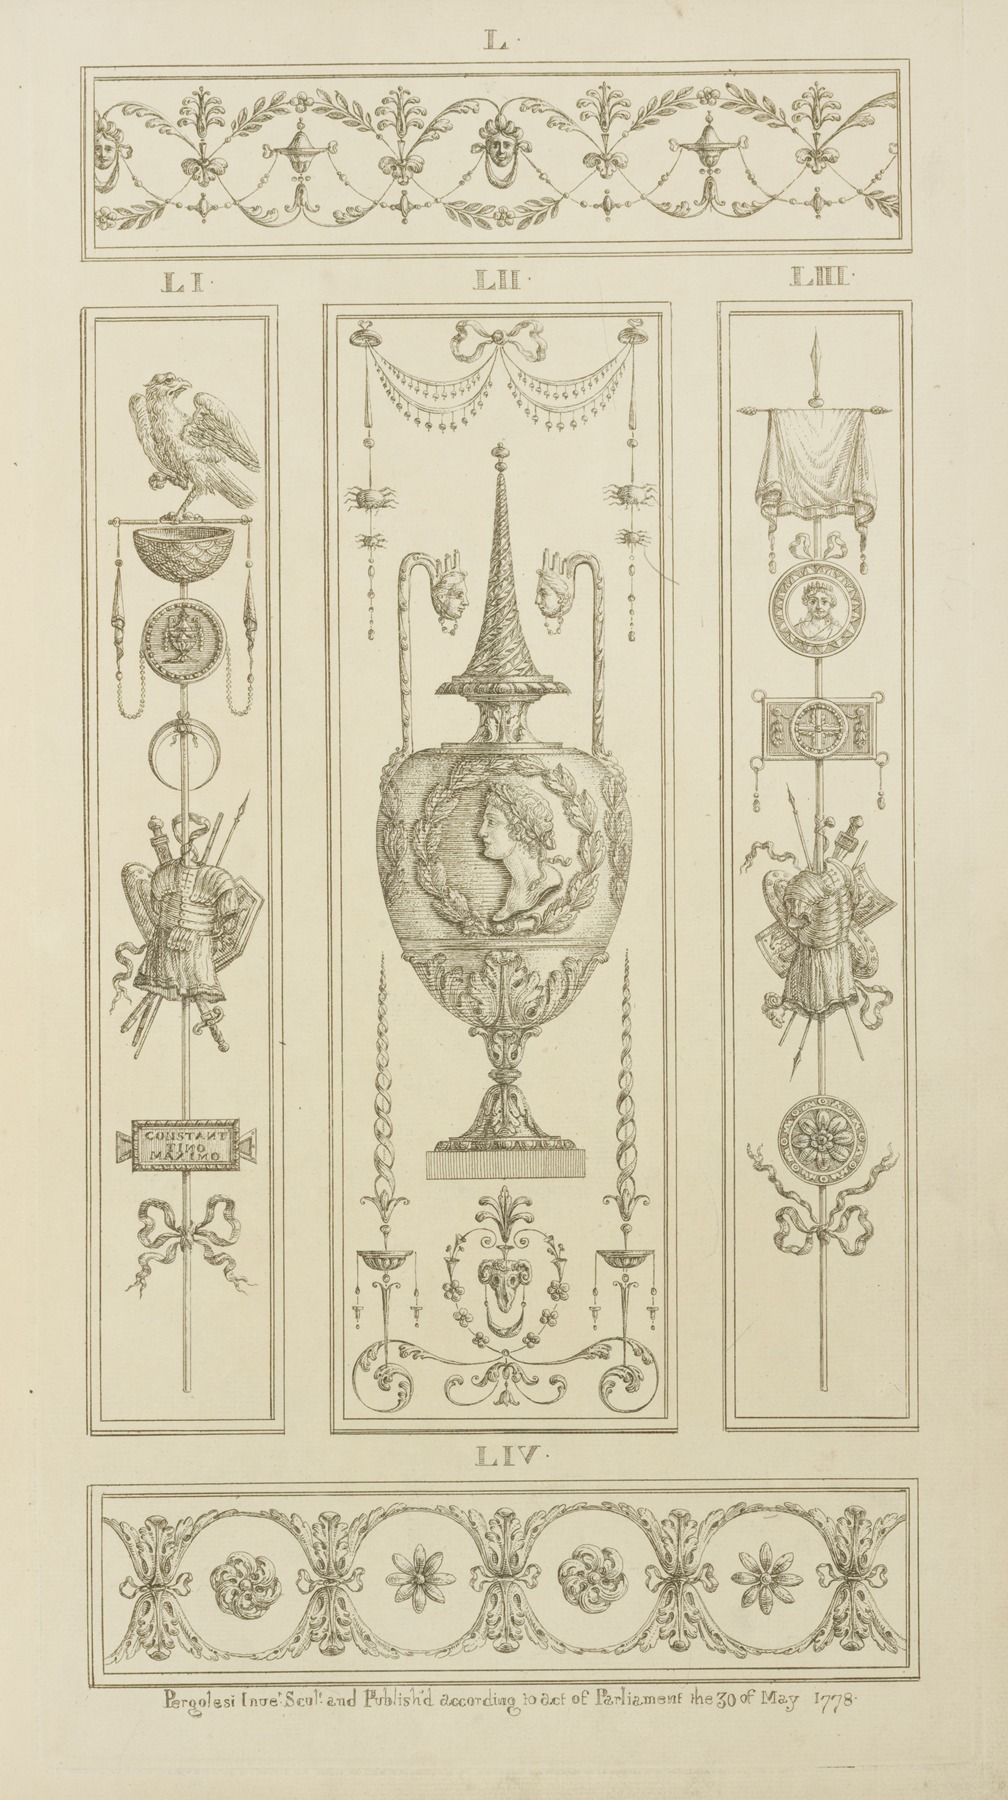 Michel Angelo Pergolesi - Central design of urn with garland and man’s bust, and two long handles with faces.